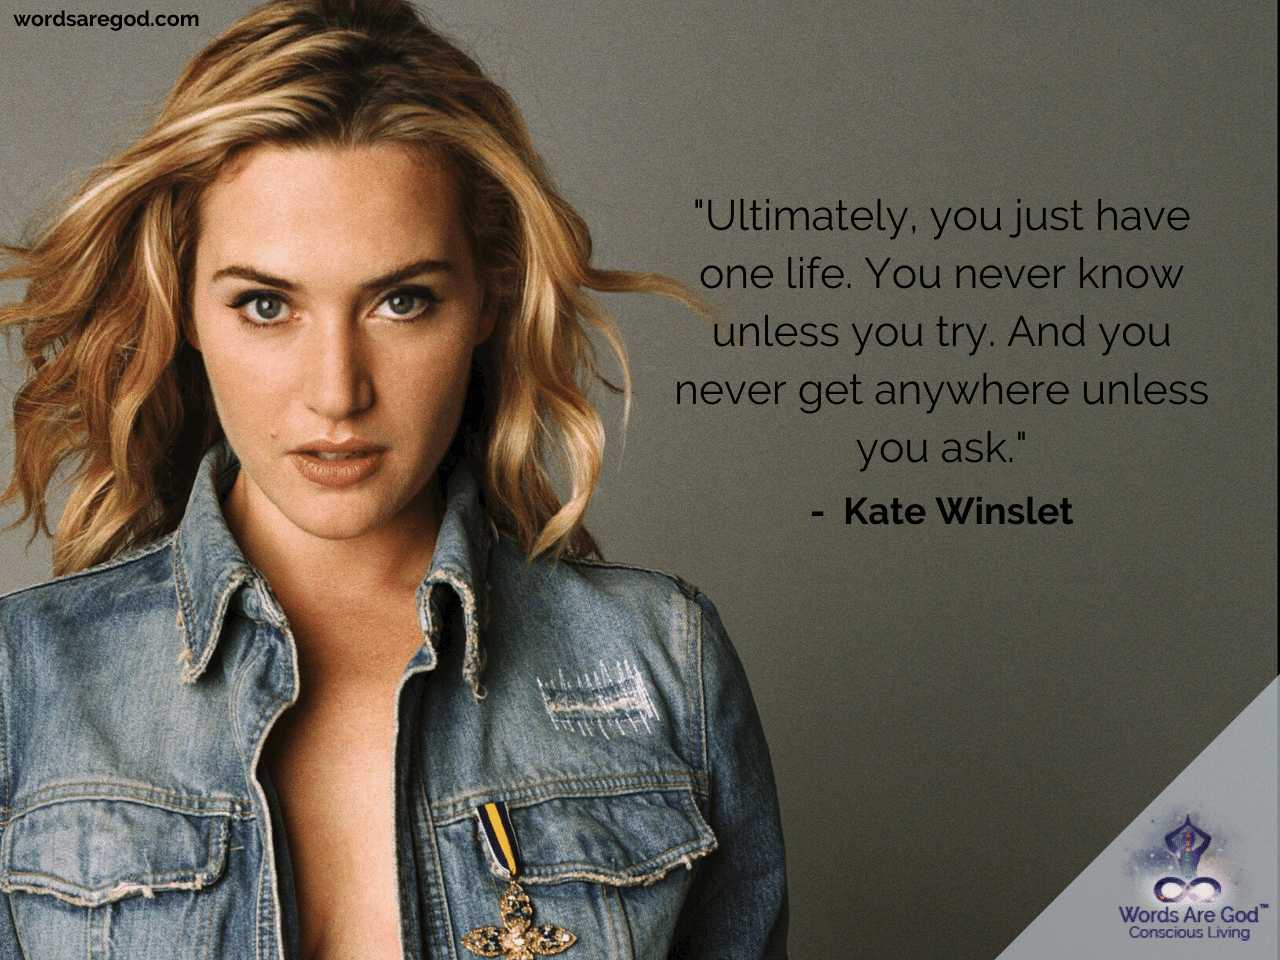 Kate Winslet Best Quotes by Kate Winslet